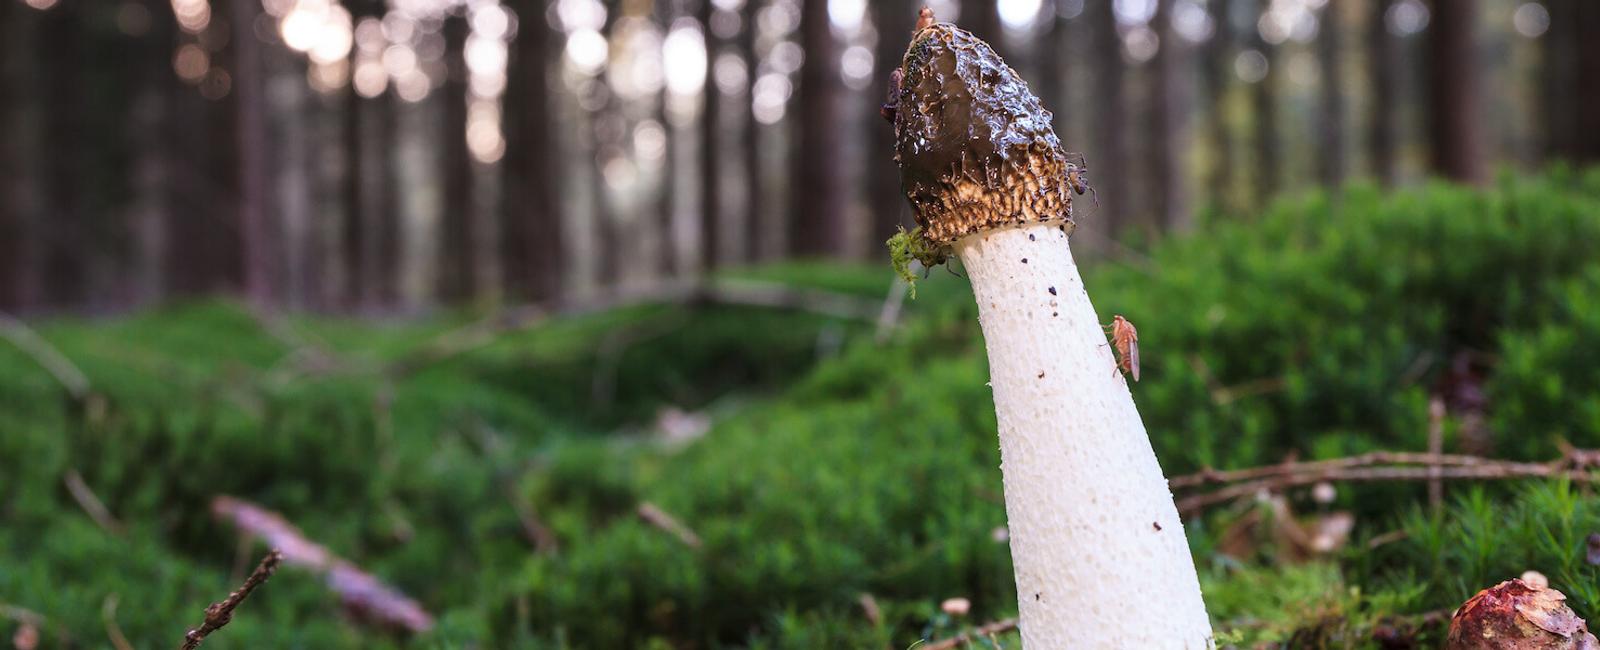 The Complete Guide to Stinkhorn Mushrooms